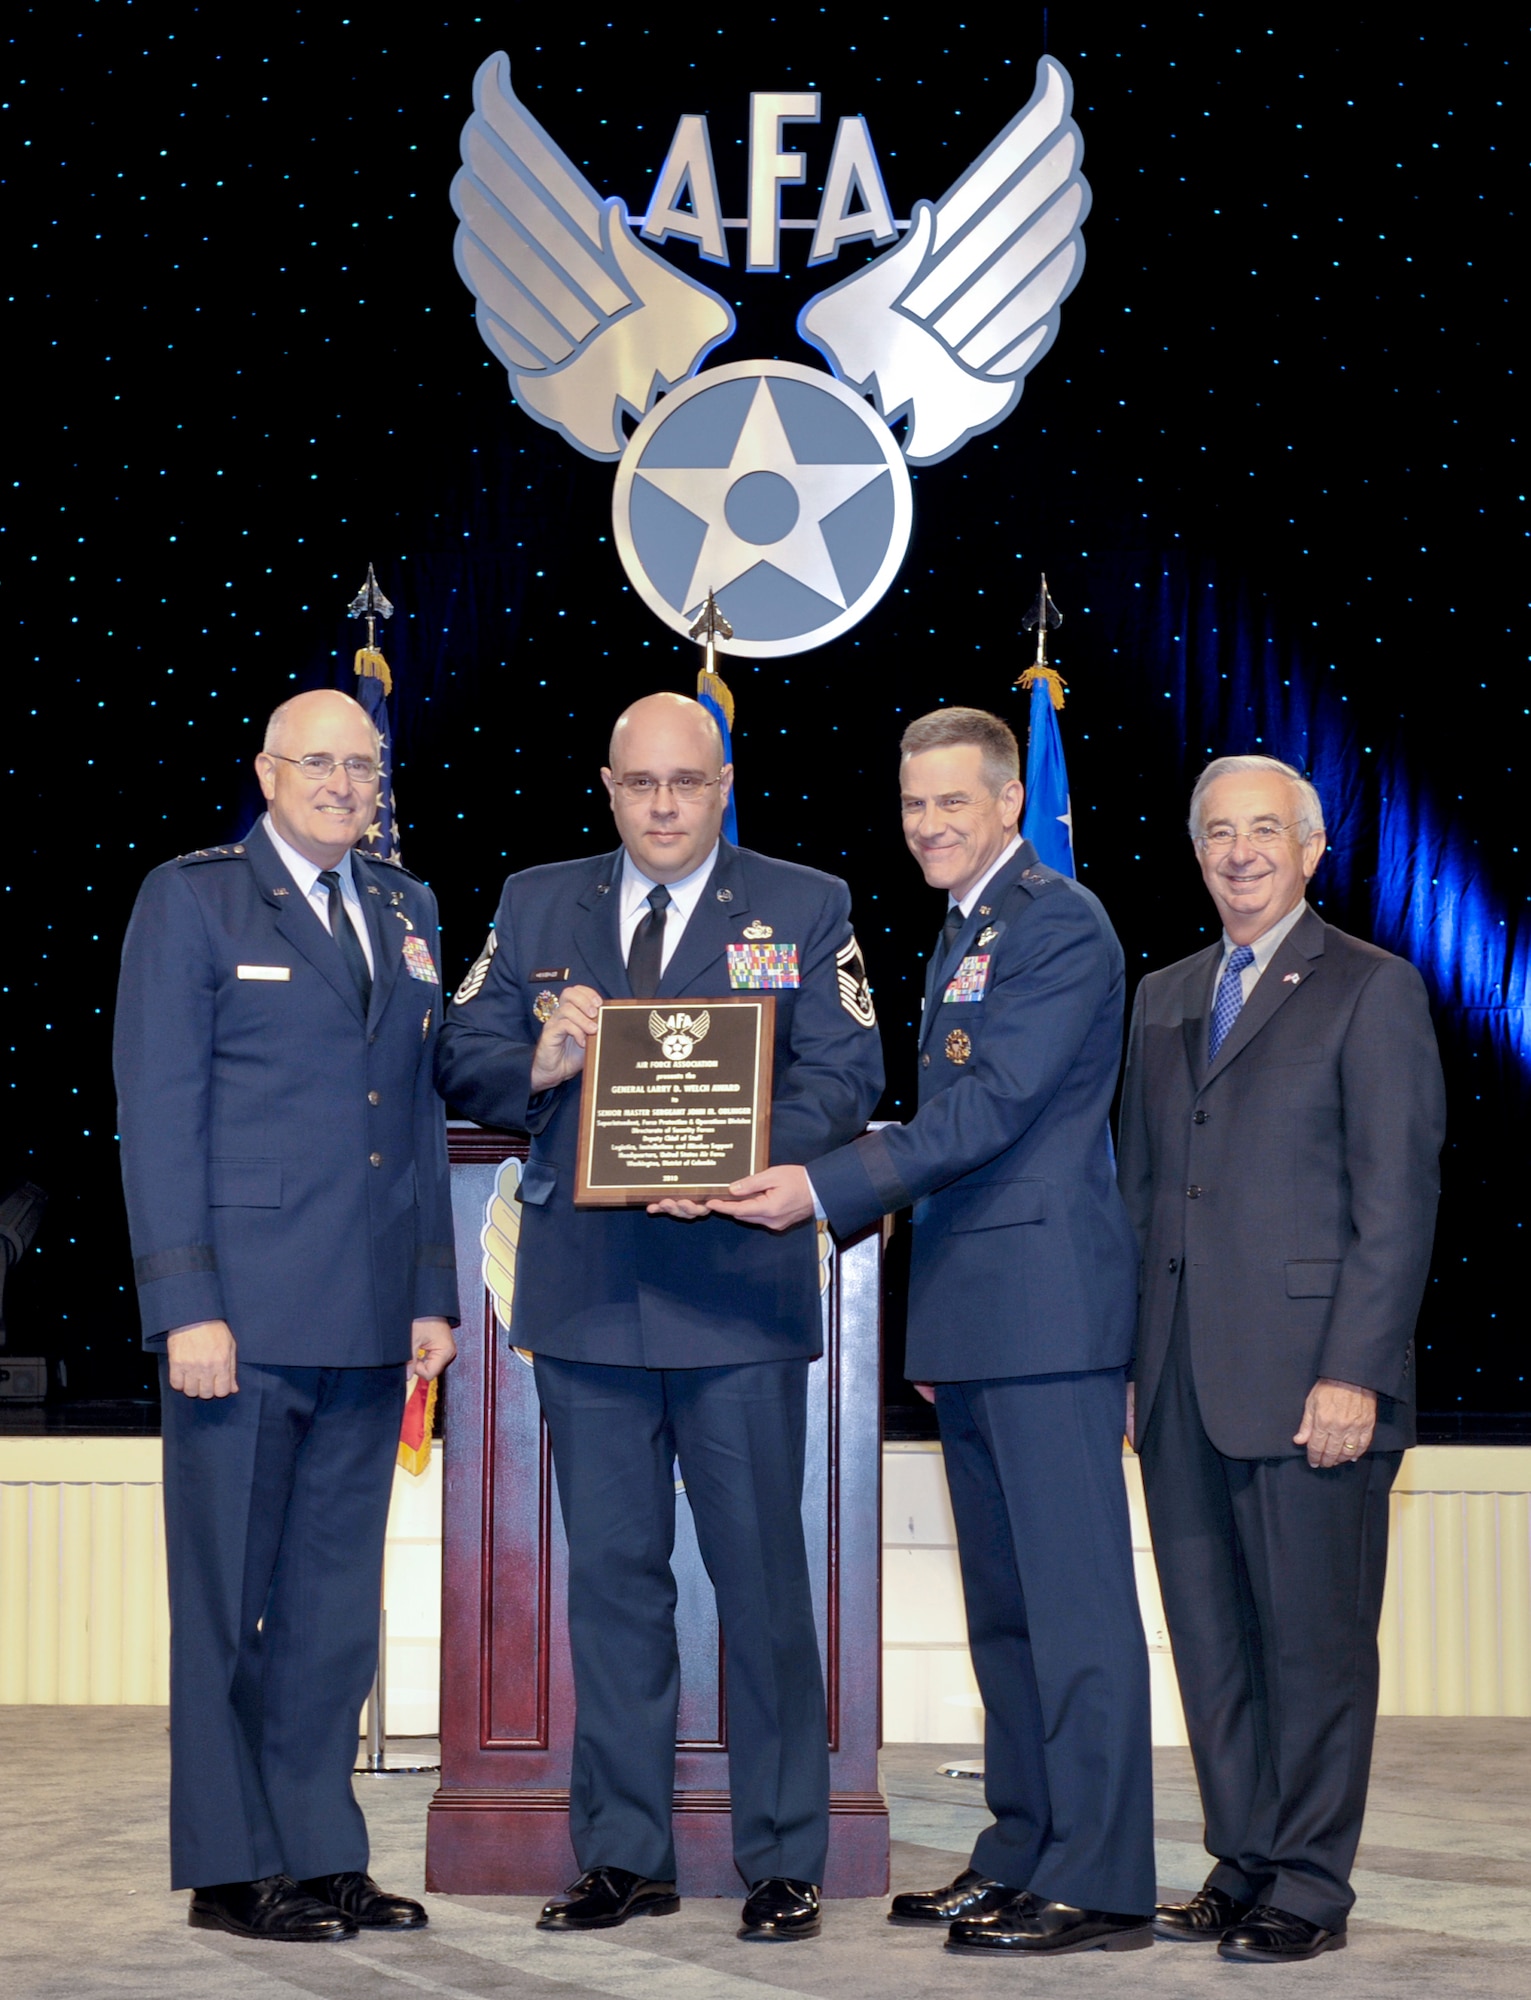 Lt. Gen. Loren M. Reno (left), Maj. Gen. William A. Chambers (center right), and Joseph Sutter (right) present the first Gen. Larry D. Welch award for individual excellence and achievement in the Air Force nuclear enterprise to Senior Master Sgt. John M. Oblinger Sept. 13, 2010, at the 2010 Air Force Association Air and Space Conference and Technology Exposition at National Harbor in Oxon Hill, Md. Sergeant Oblinger is the superintendent of the force protection and operations division for installations and mission support. He constructed the first Air Force Nuclear Security Roadmap and led the rewrite of the Air Force Nuclear Security Manual in a record 140 days, a process that could take more than 18 months to complete. General Reno is the deputy chief of staff for installations and mission support. General Chambers is the assistant chief of staff for strategic deterrence and nuclear integration. Mr. Sutter is the president of the Air Force Association. (U.S. Air Force photo/Michael Pausic)